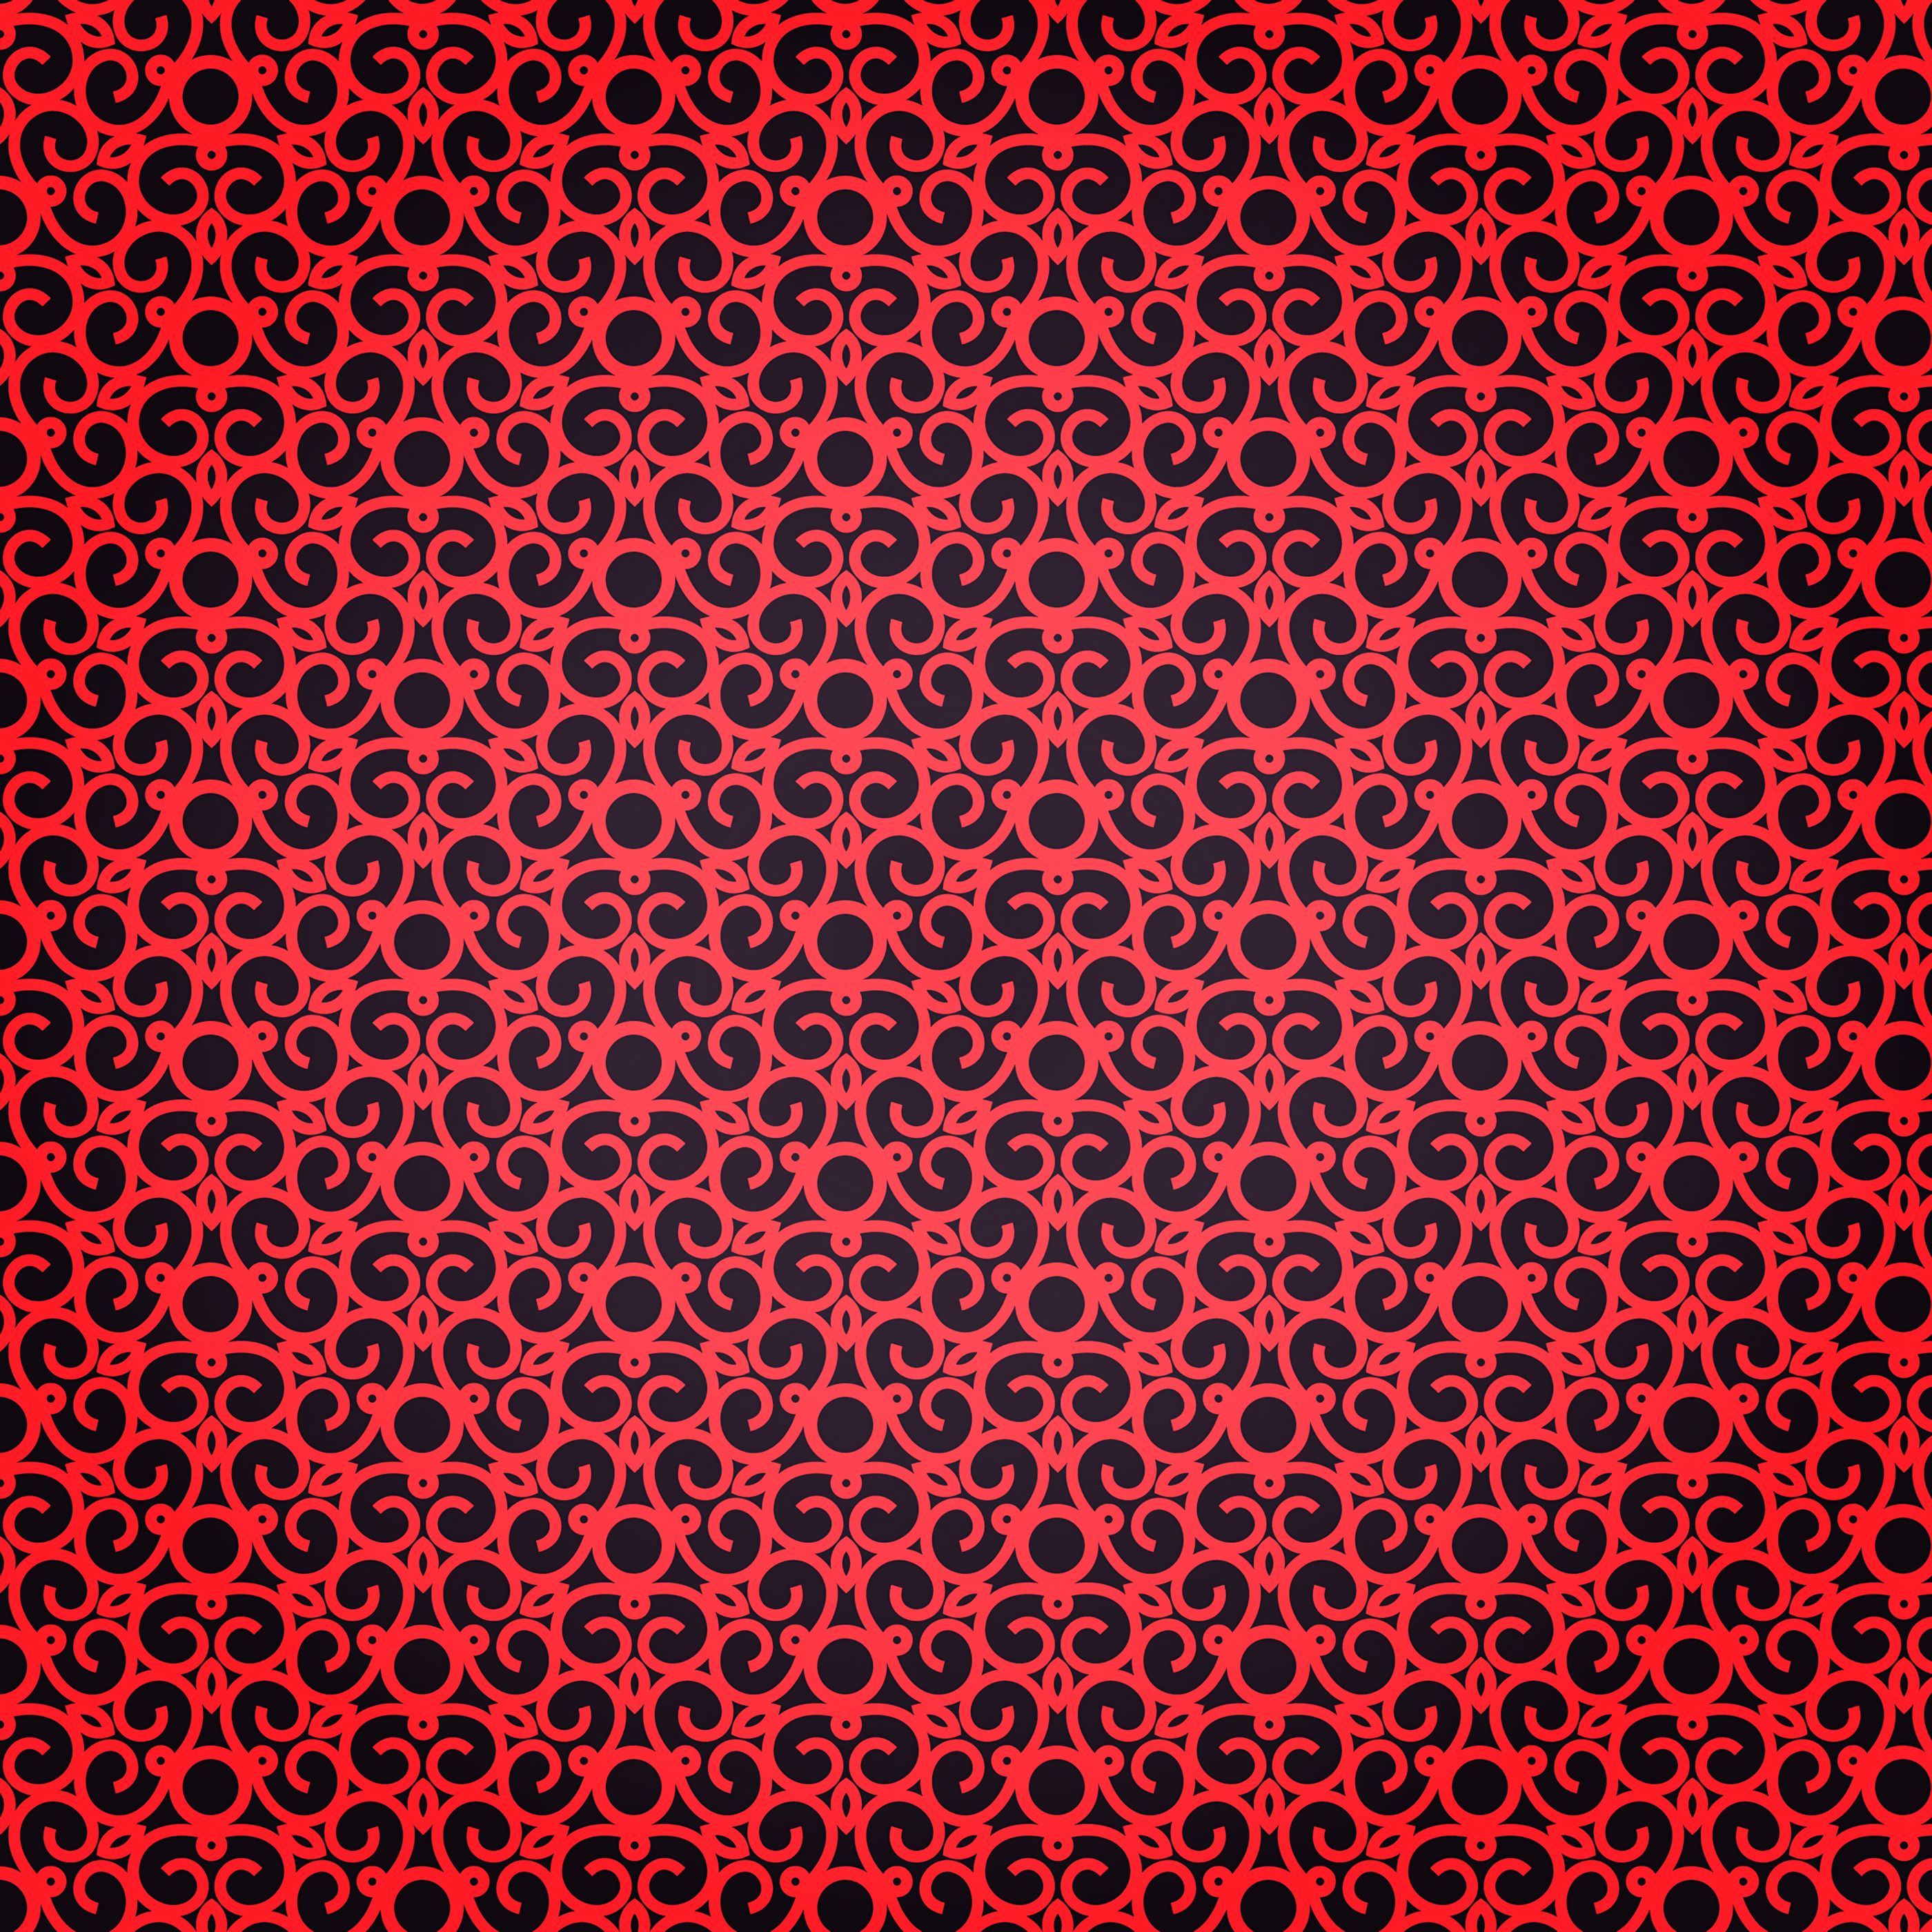 texture, patterns, black, red, textures, swirling, involute download HD wallpaper